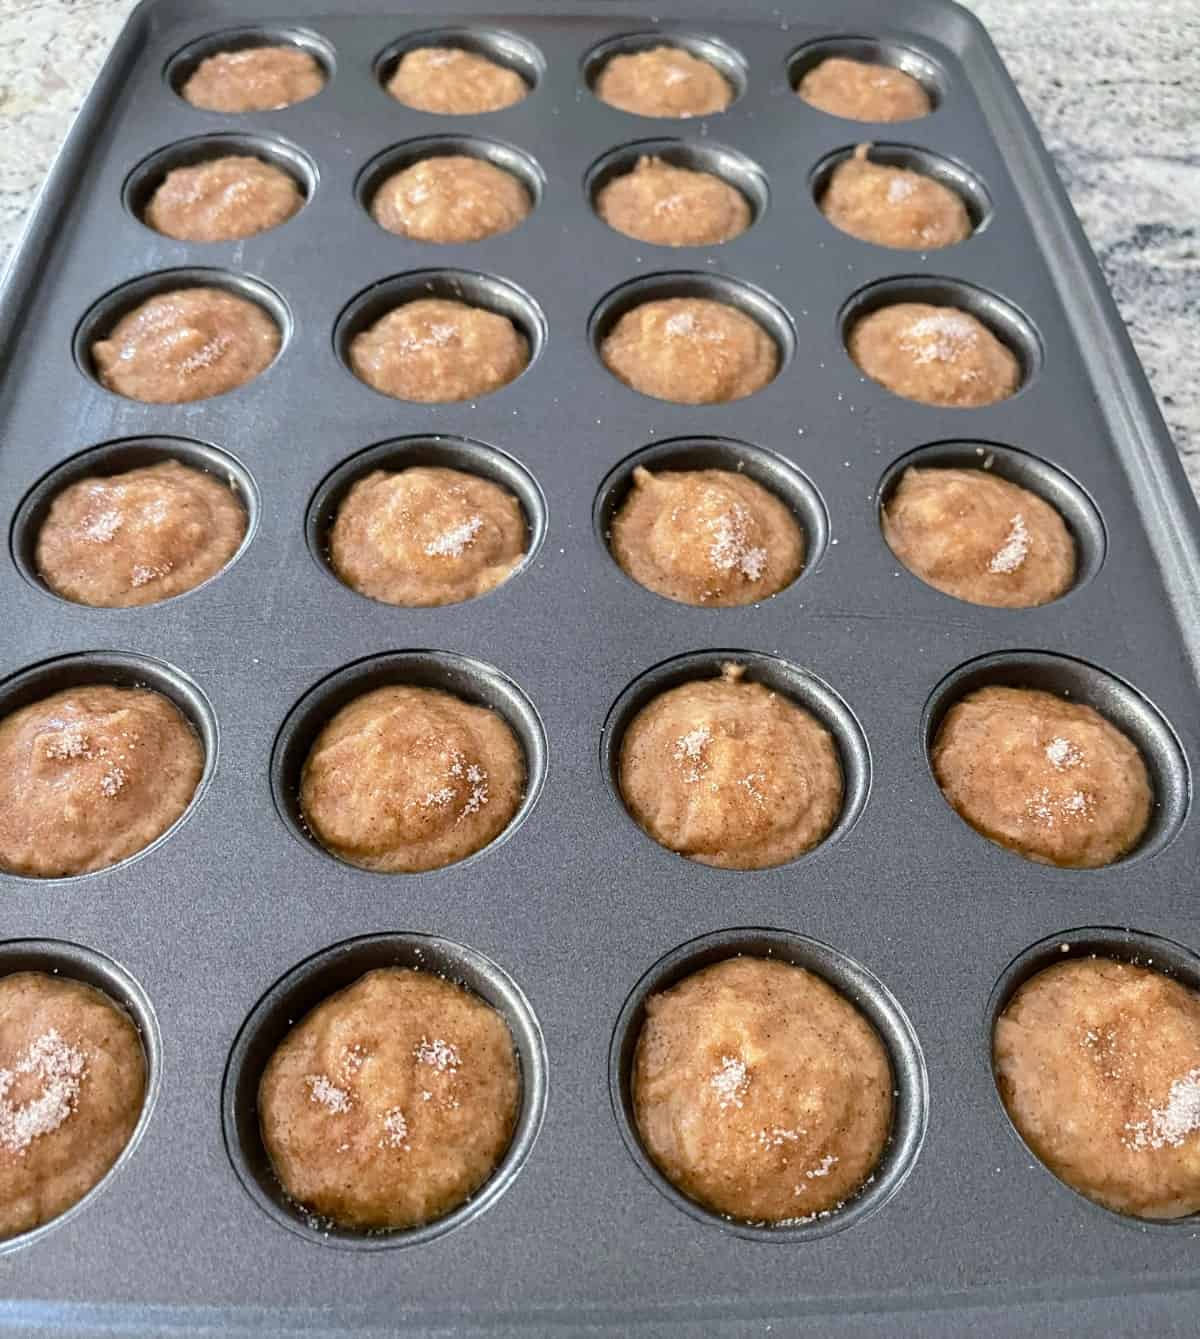 Unbaked mini cinnamon apple muffins in muffin pan with cinnamon-sugar mixture sprinkled on top.